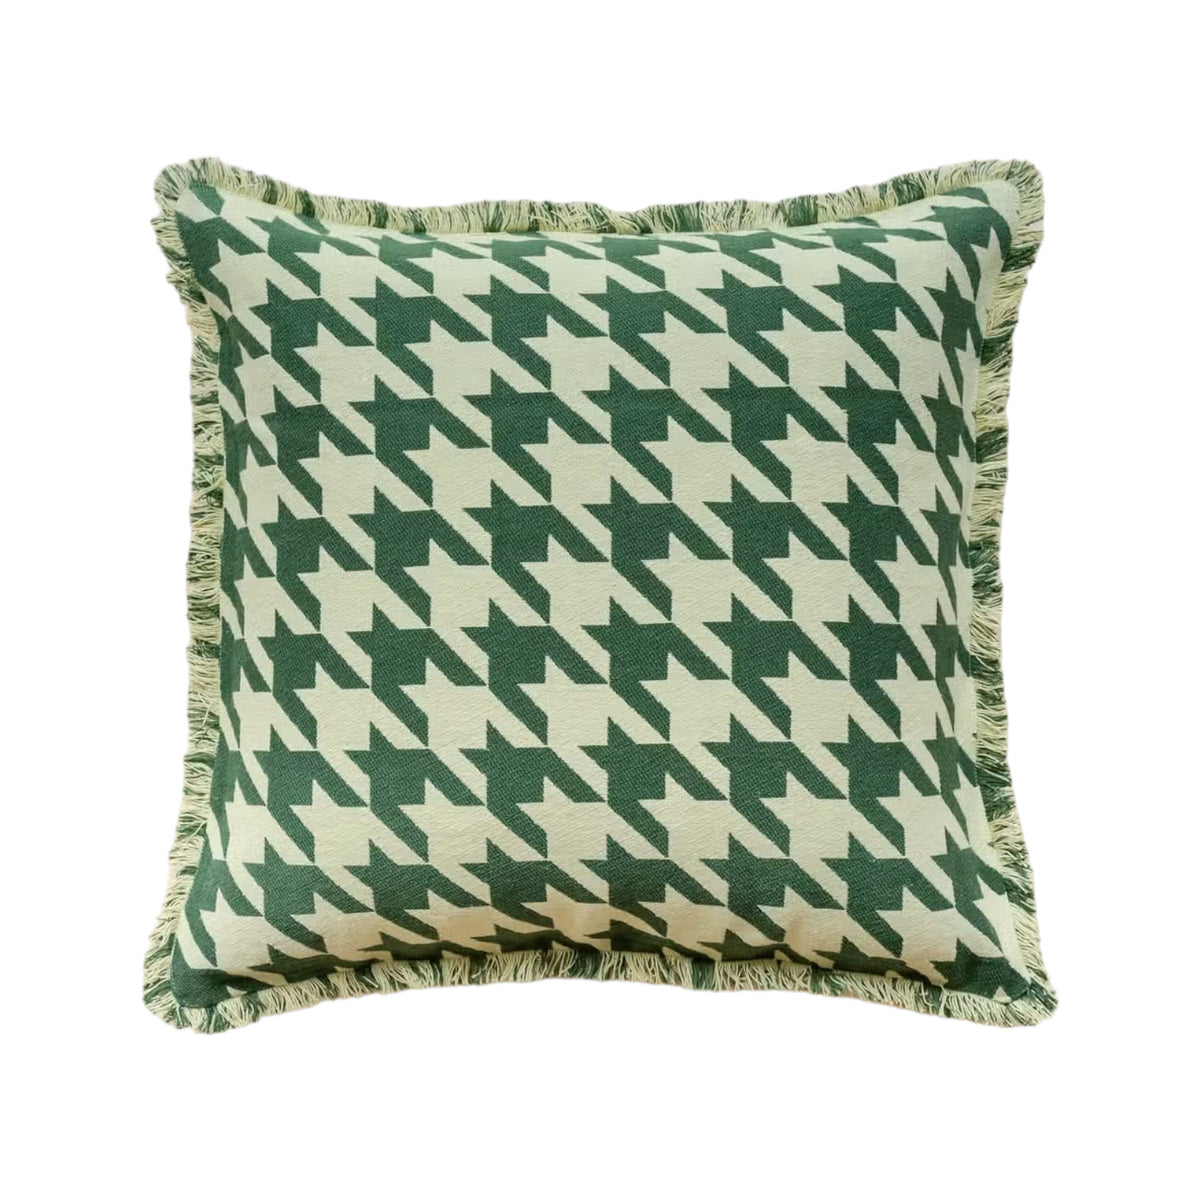 Green Houndstooth Cotton Cushion Cover - Holistic Habitat 